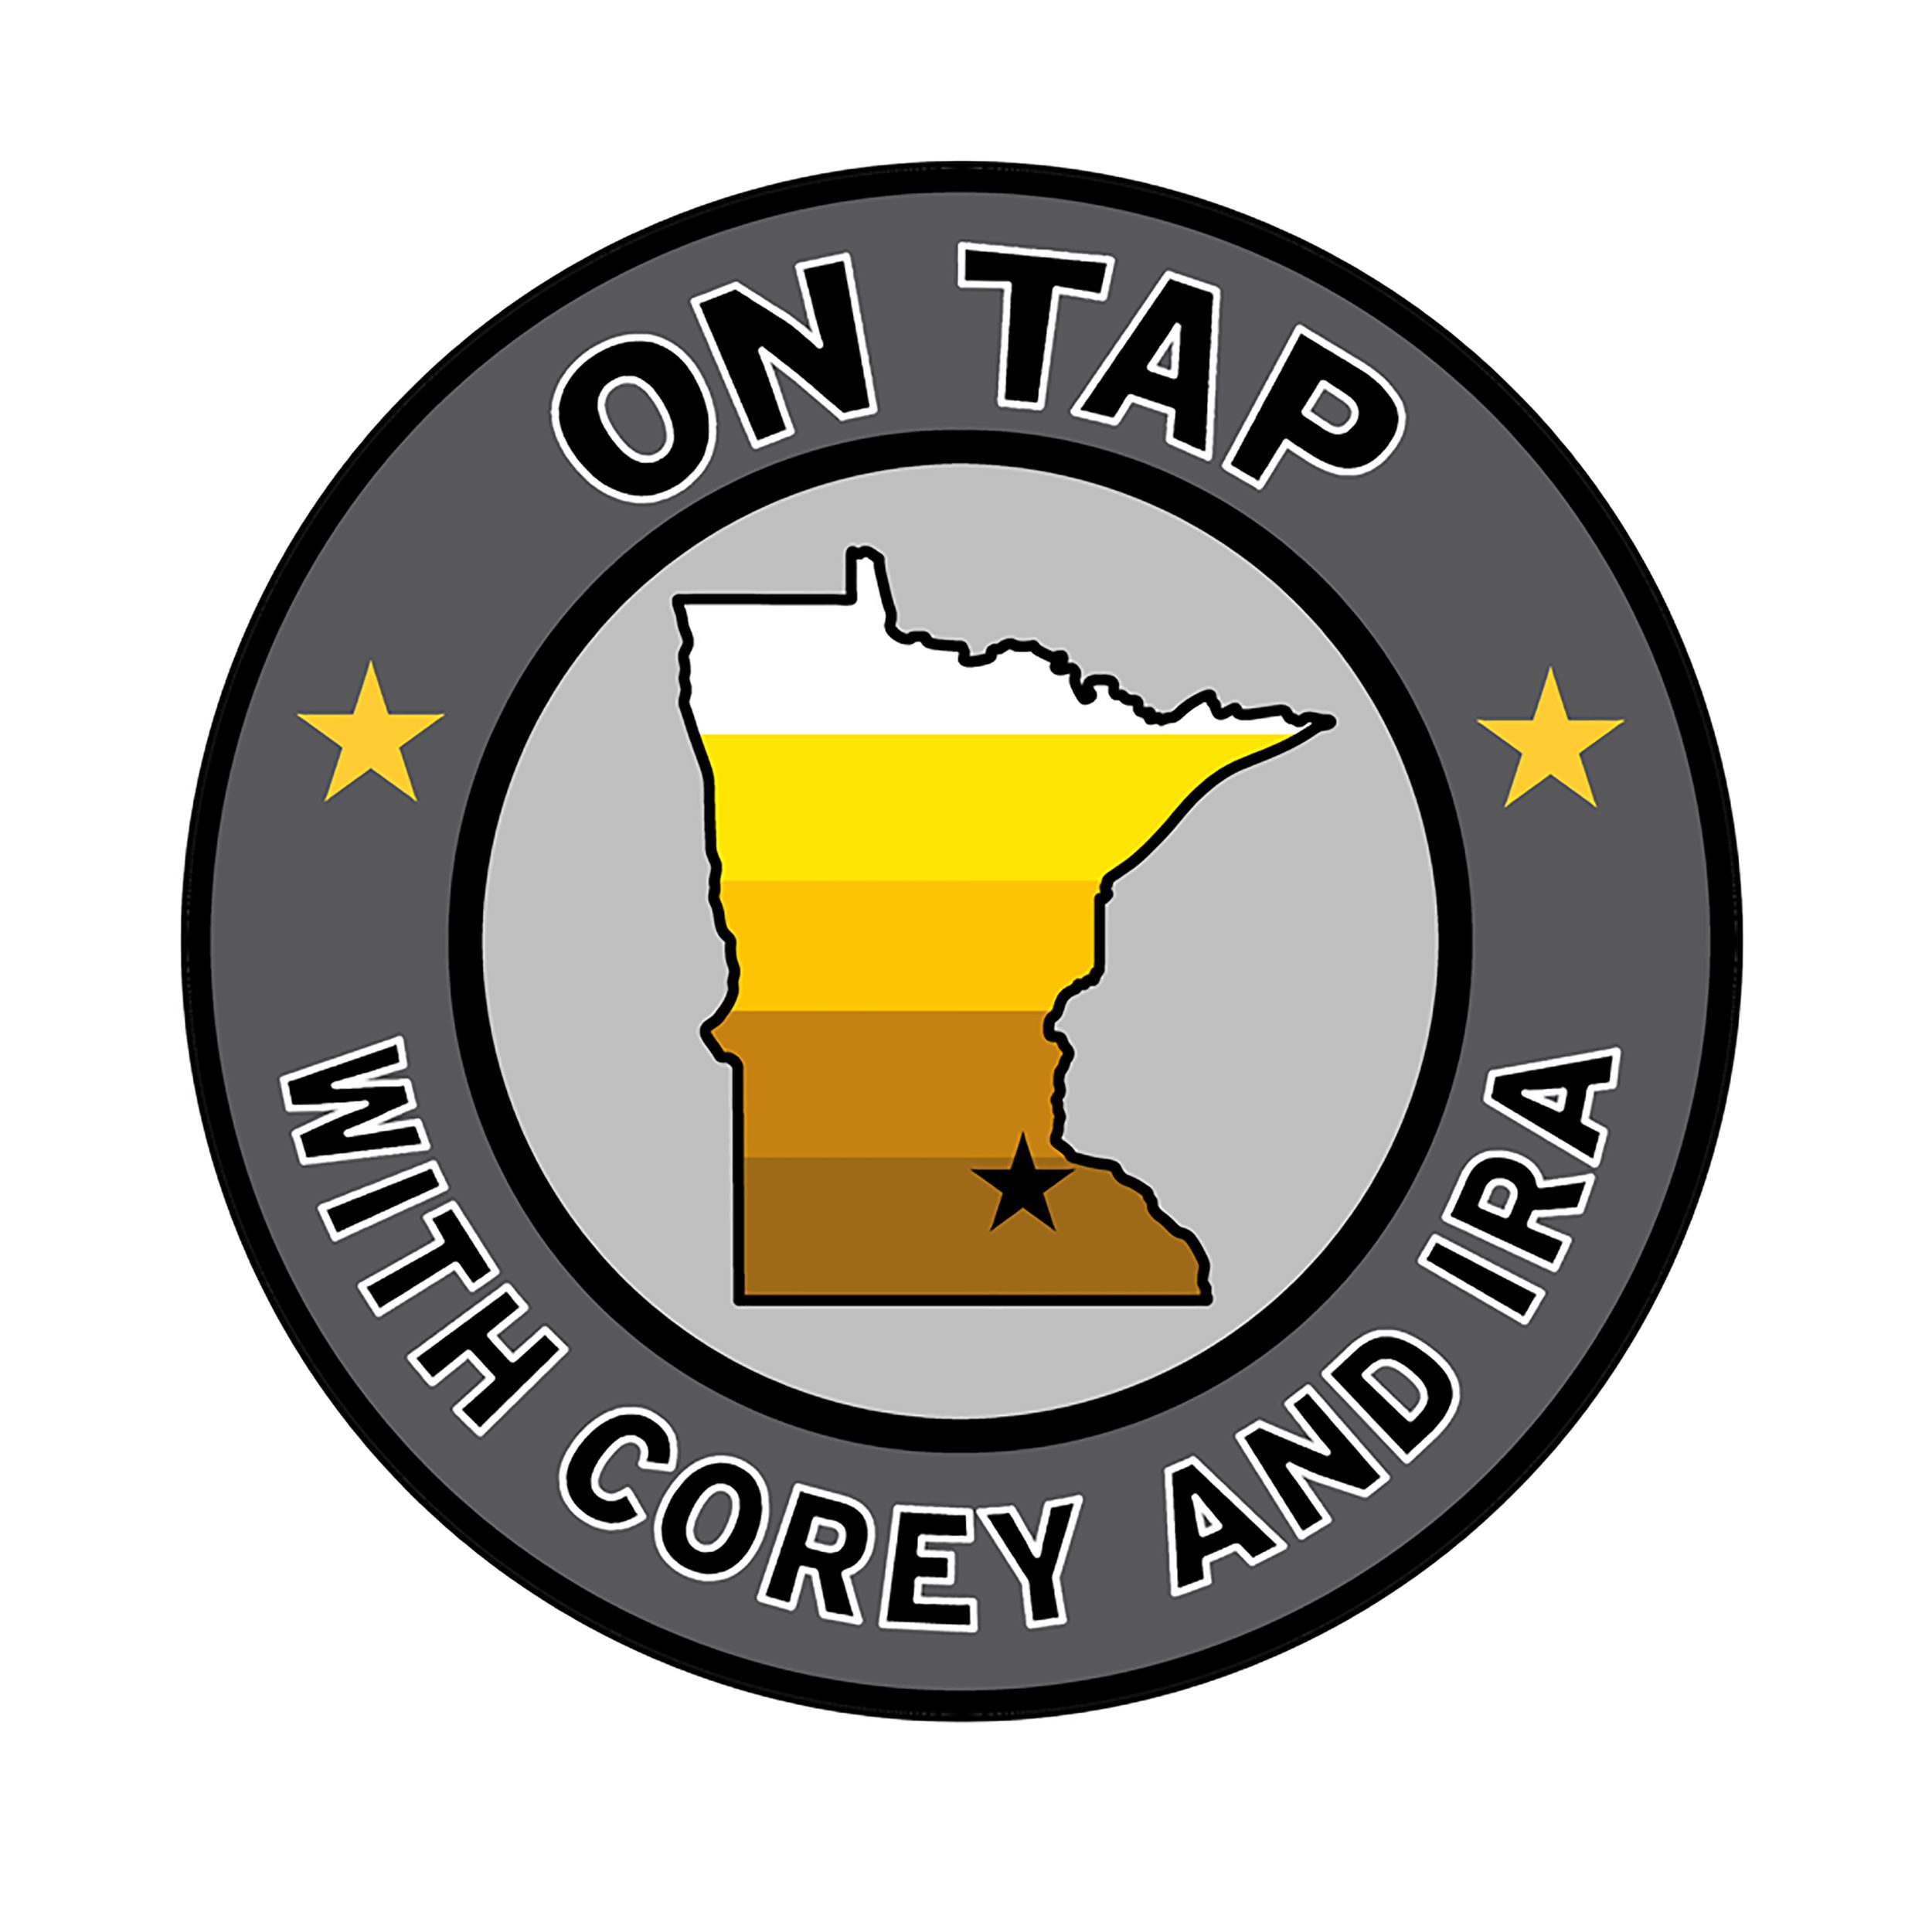 On Tap with Corey and Ira